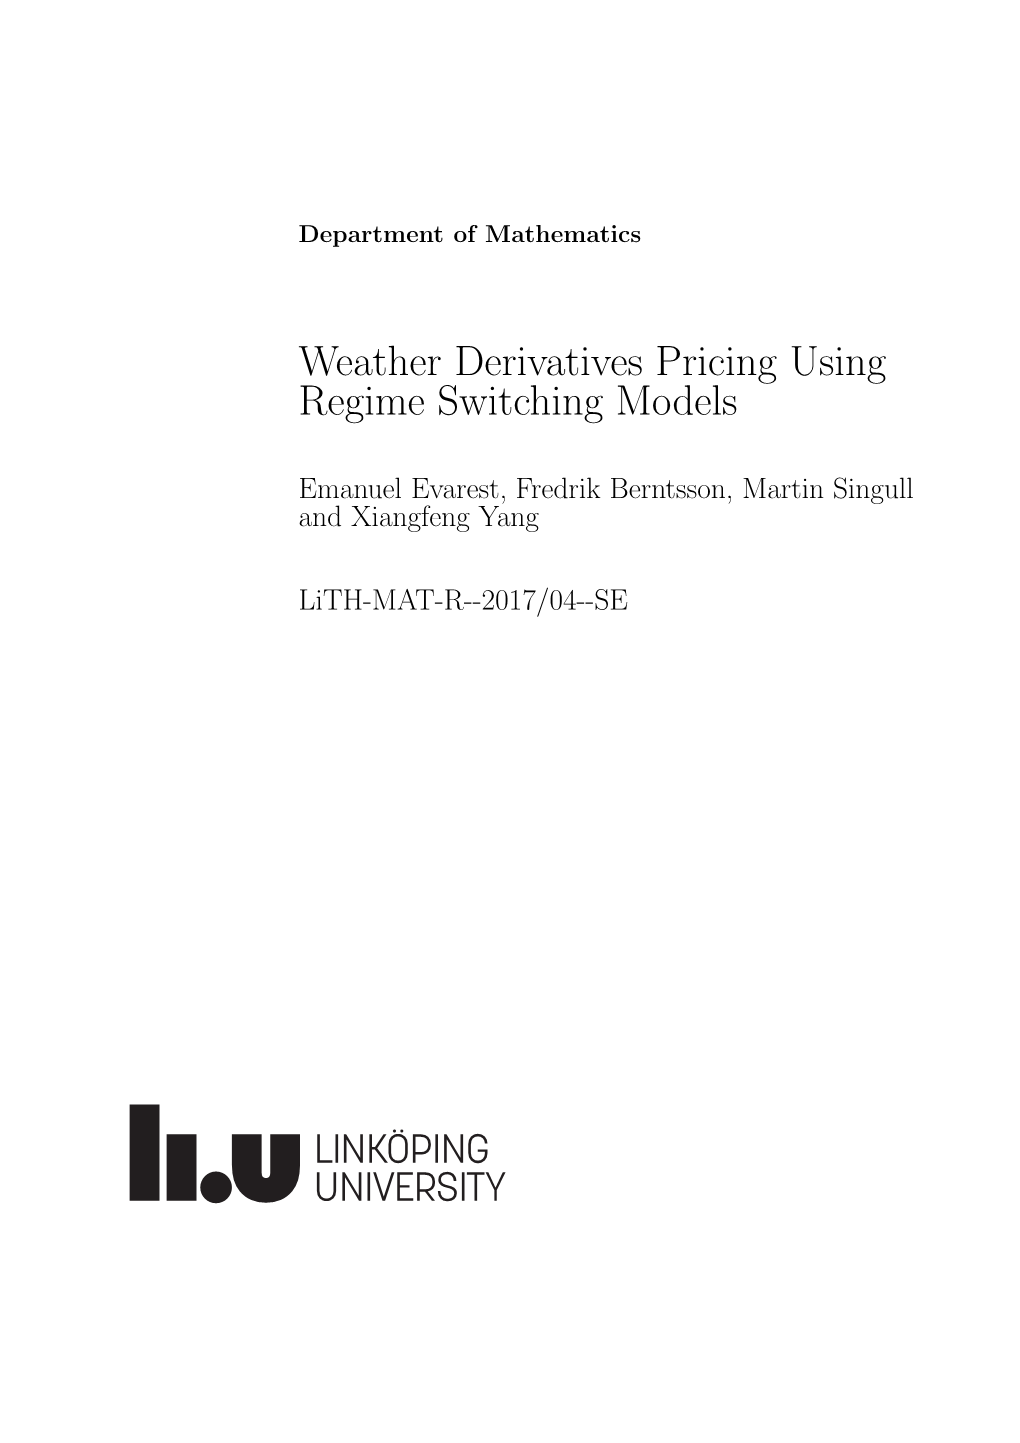 Weather Derivatives Pricing Using Regime Switching Models